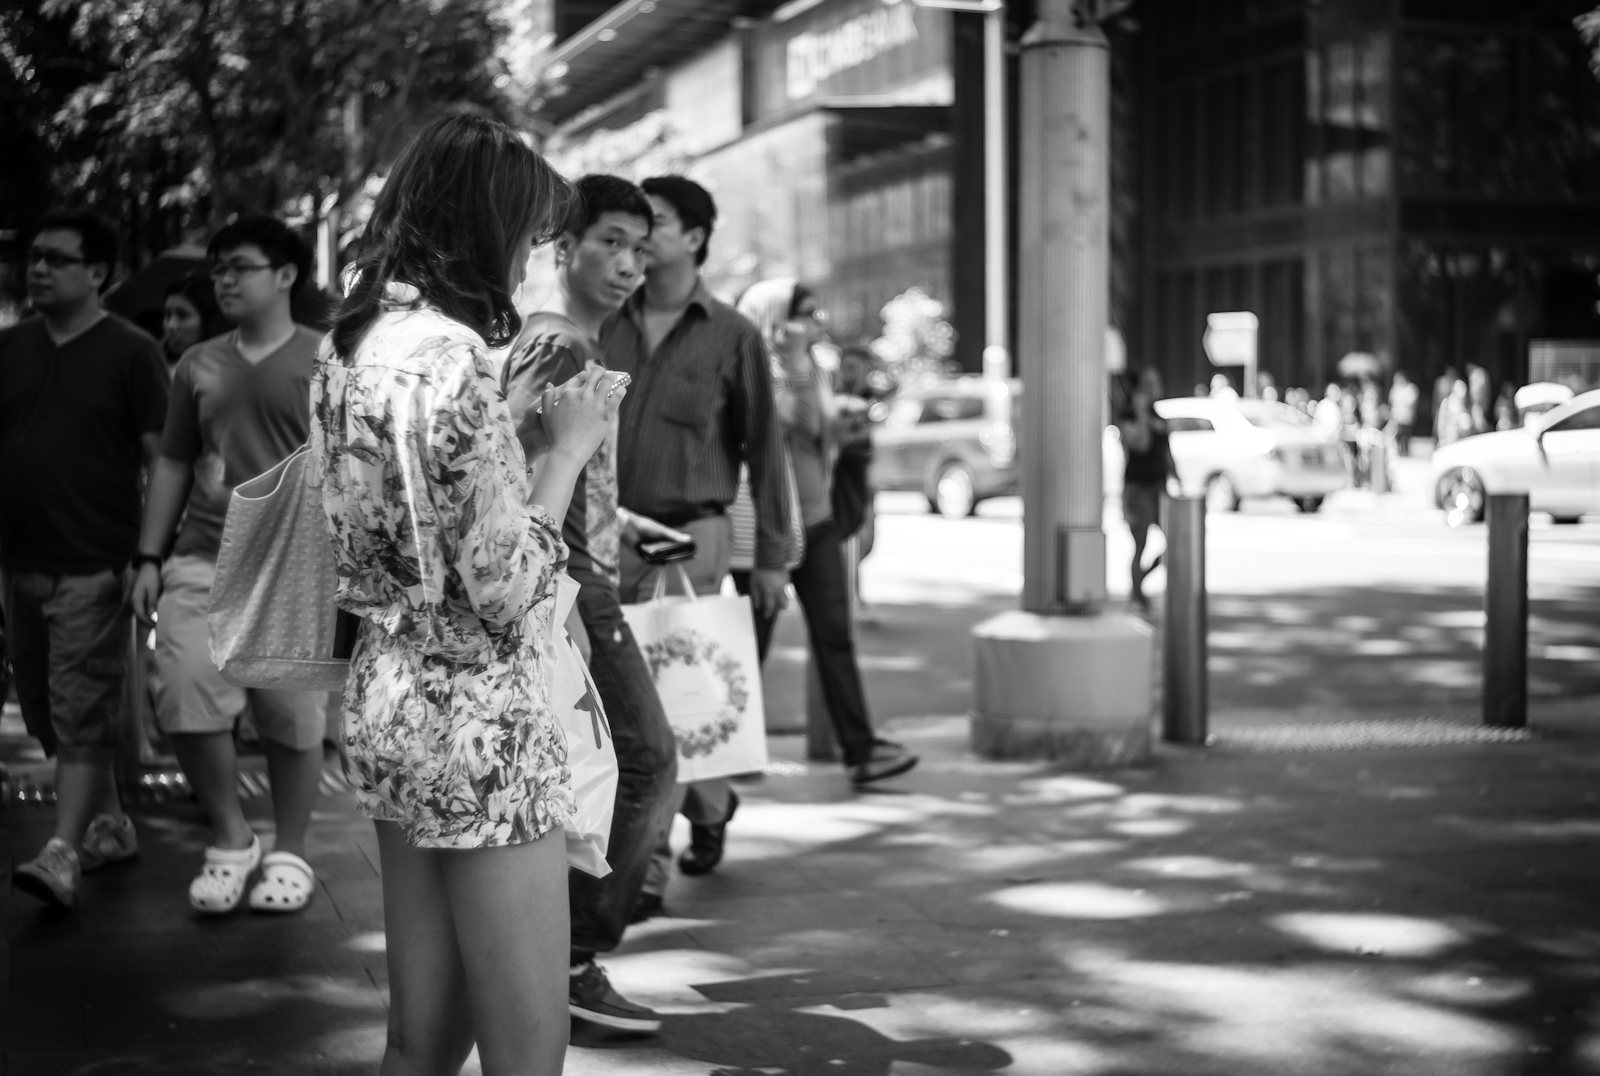 Street photography - girl in floral clothing standing in the middle of the side walk